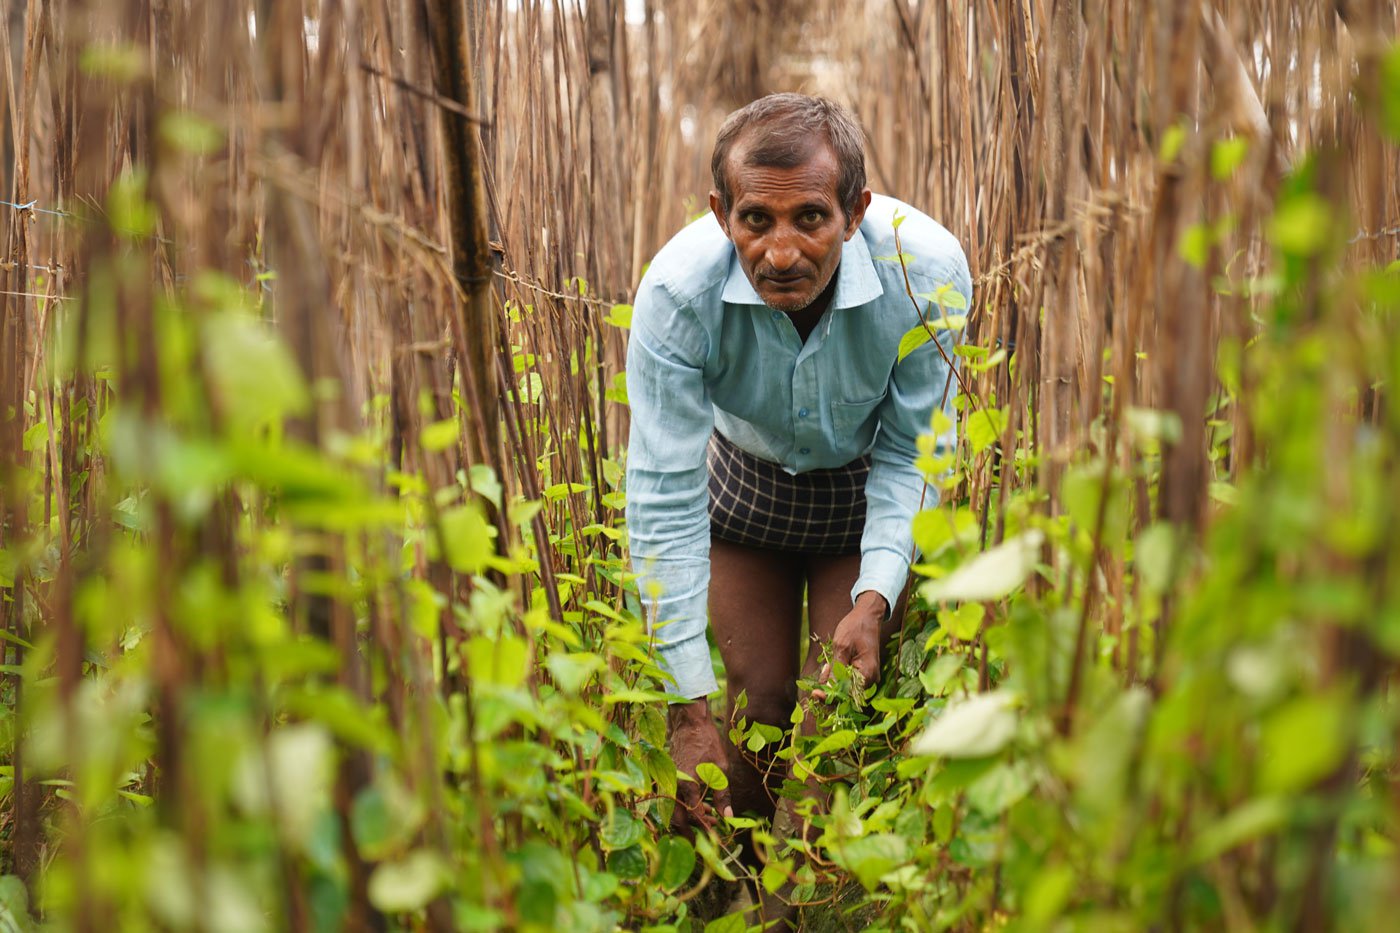 Betel leaf farmer Ajay Chaurasia says, ' Magahi betel leaf cultivation is as uncertain as gambling...we work very hard, but there is no guarantee that betel plants will survive'